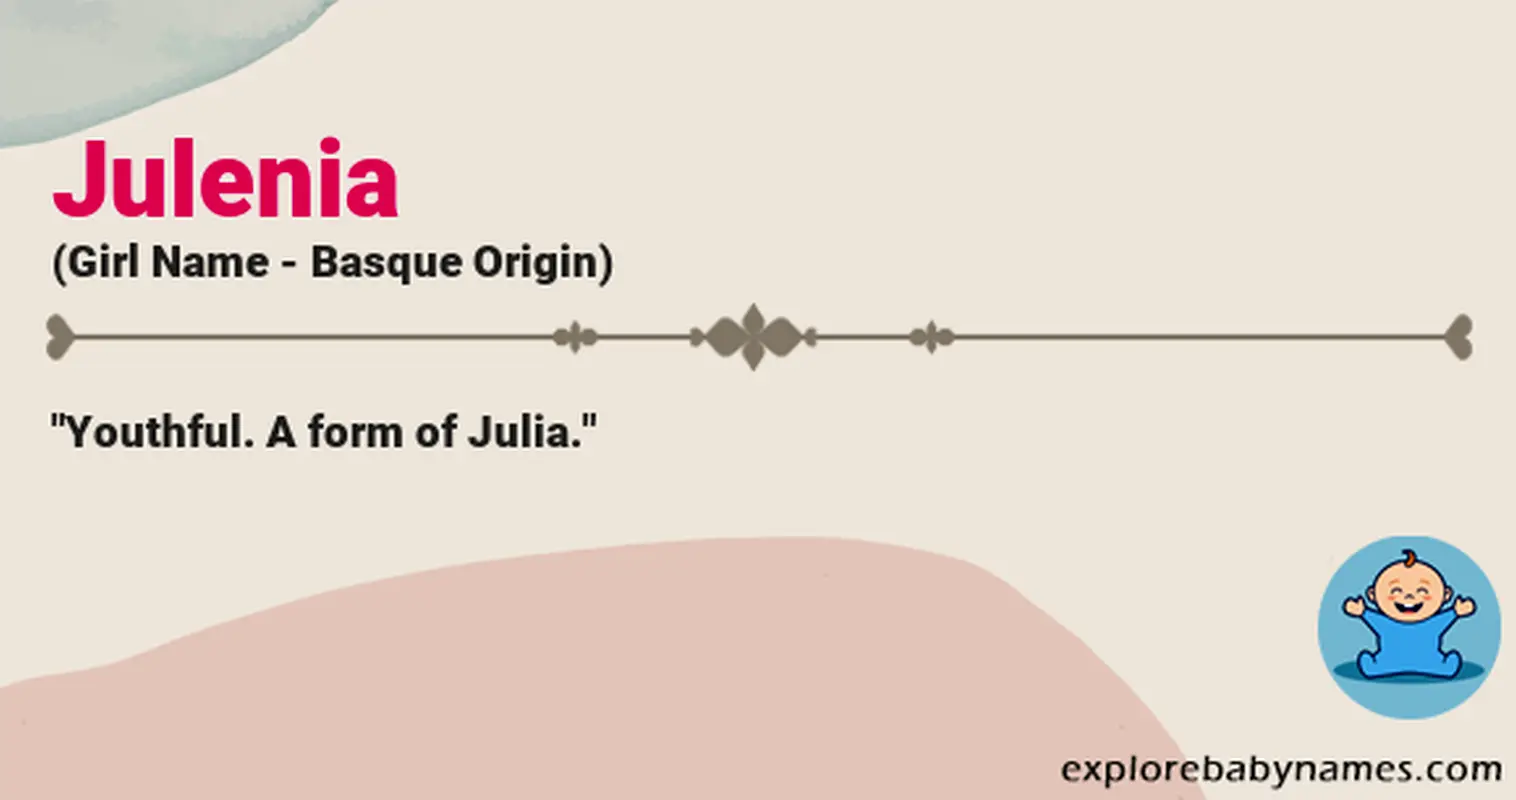 Meaning of Julenia